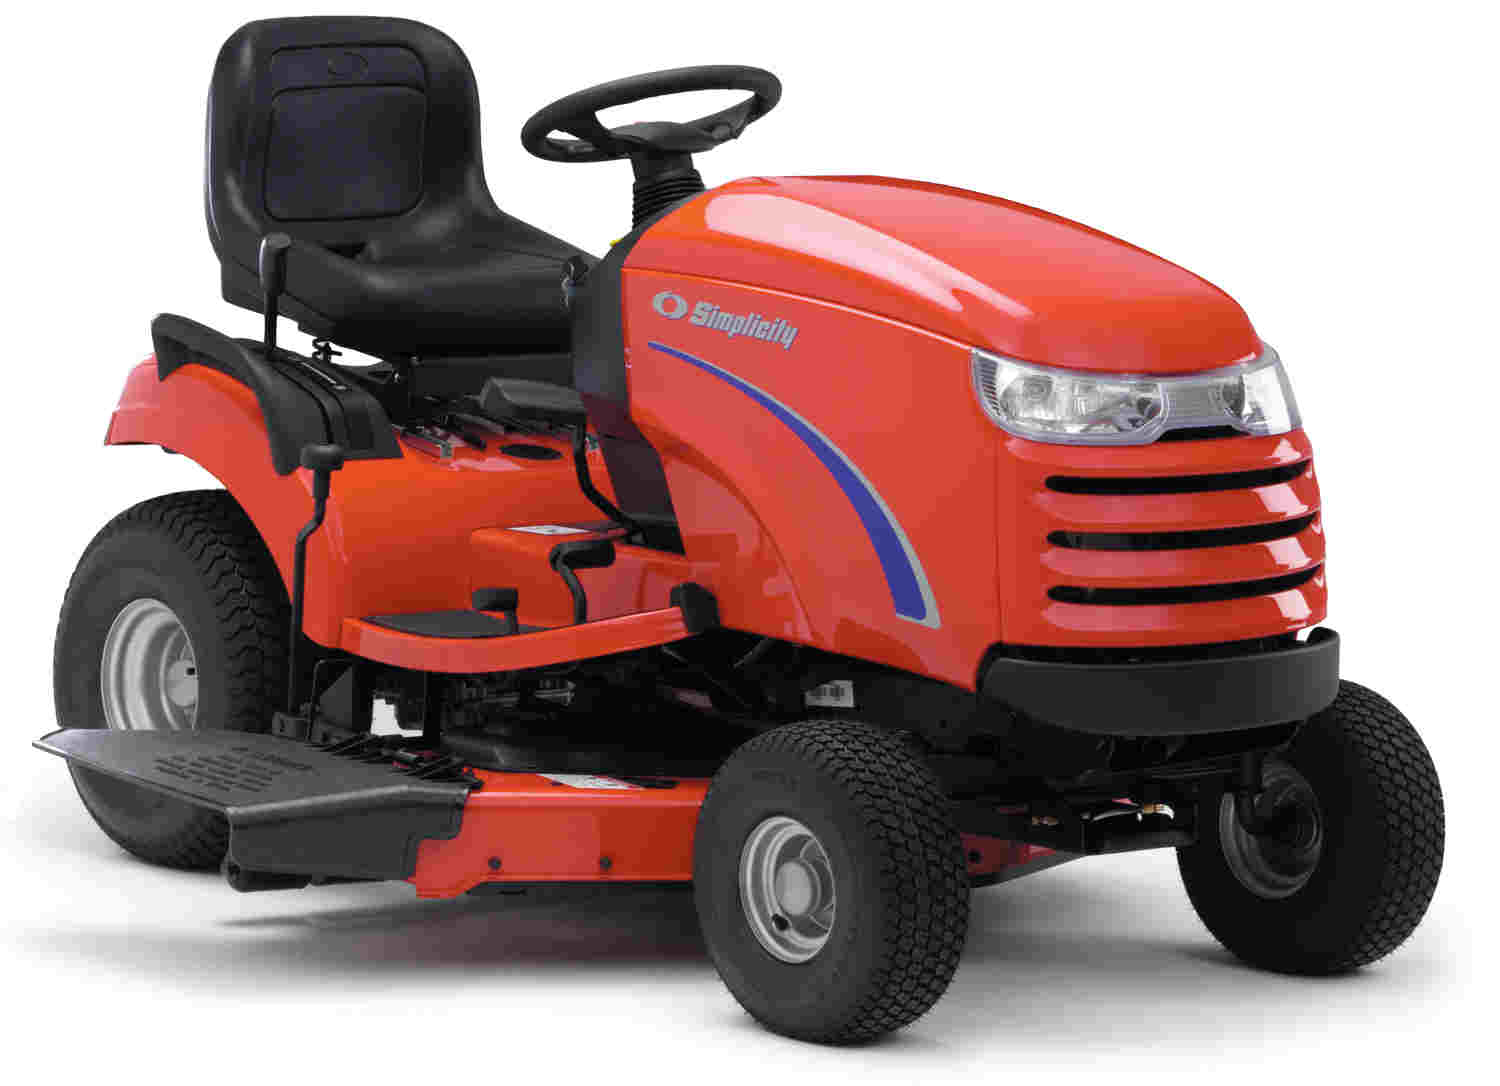 Simplicity Broadmoor: The Lawn Tractor that thinks it's a Garden ...